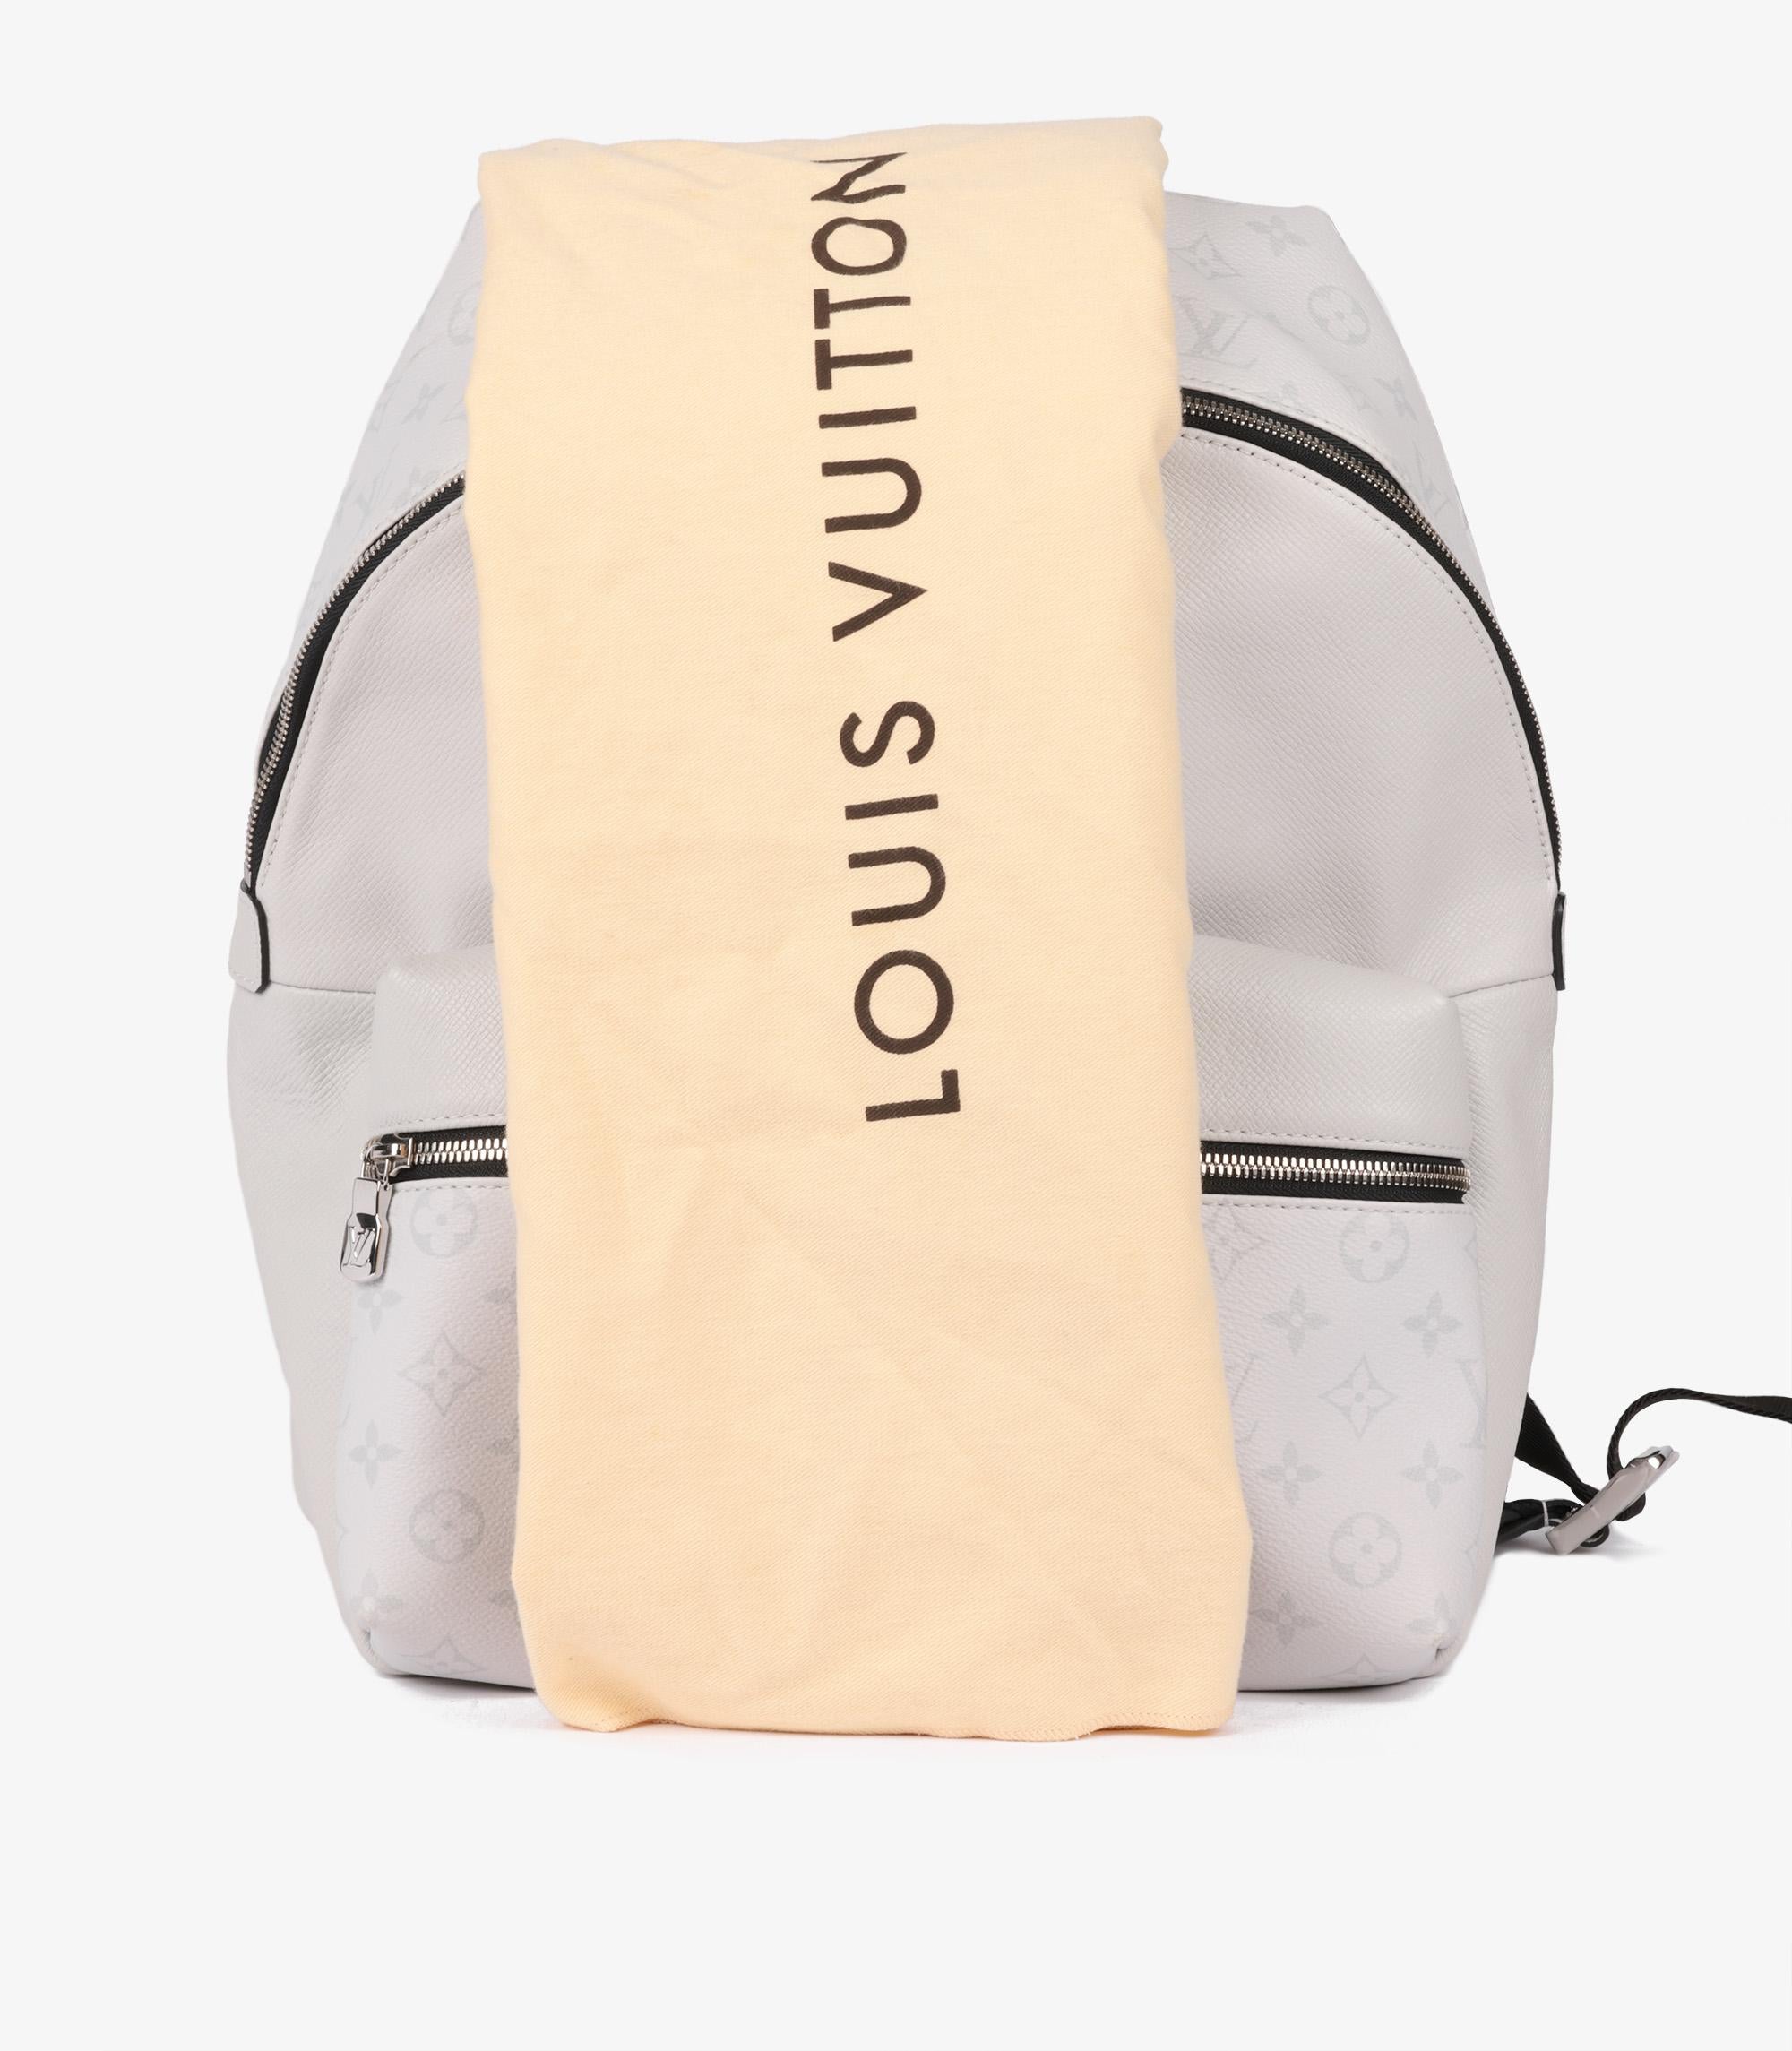 Louis Vuitton Virgil Abloh Discovery Backpack For Sale 6